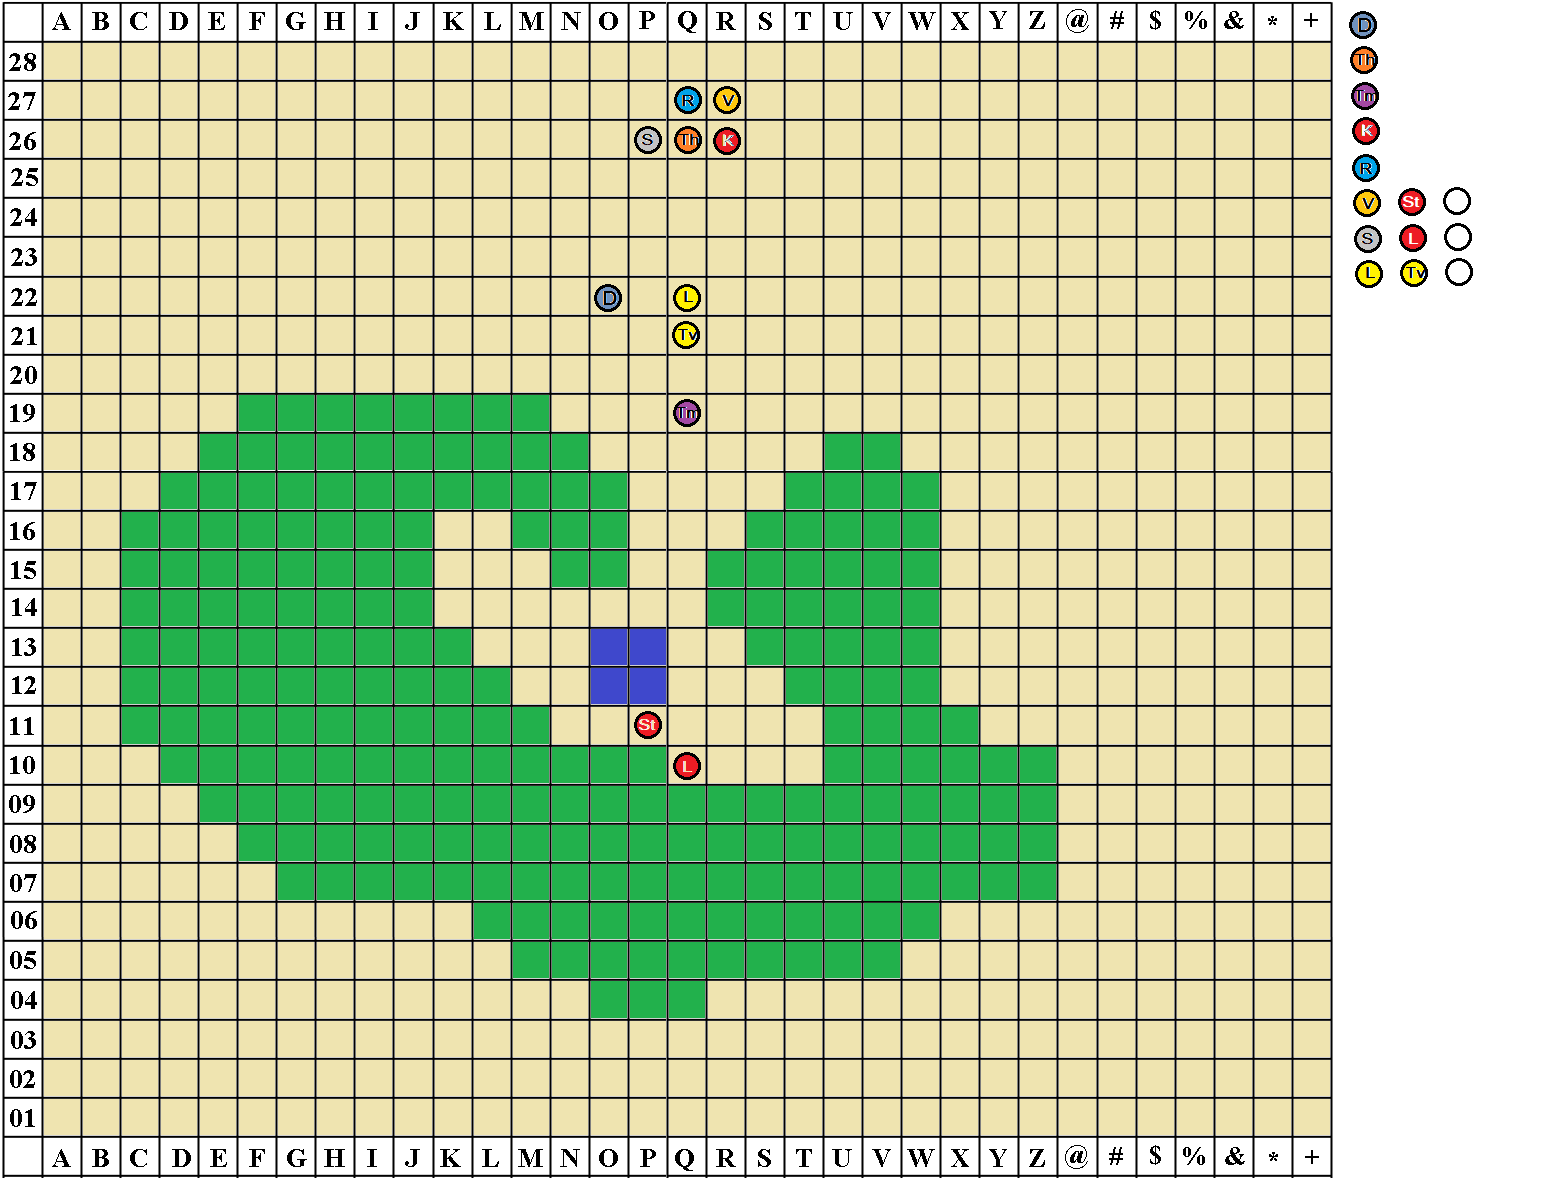 00-Oasis-Base-Map-002a.png